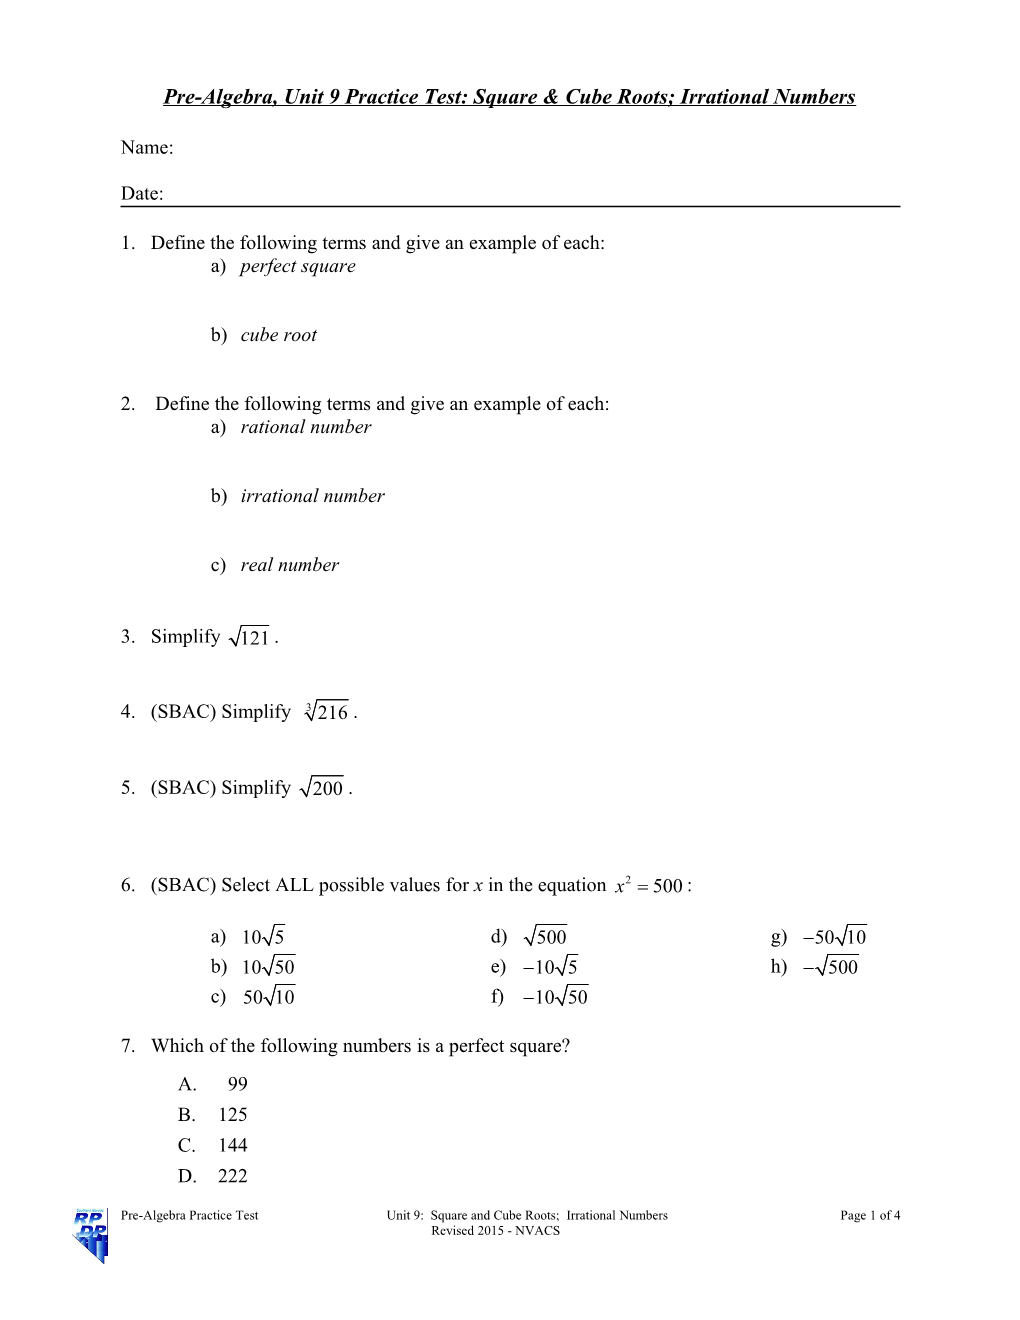 Pre-Algebra, Unit 9 Practice Test: Square & Cube Roots; Irrational Numbers